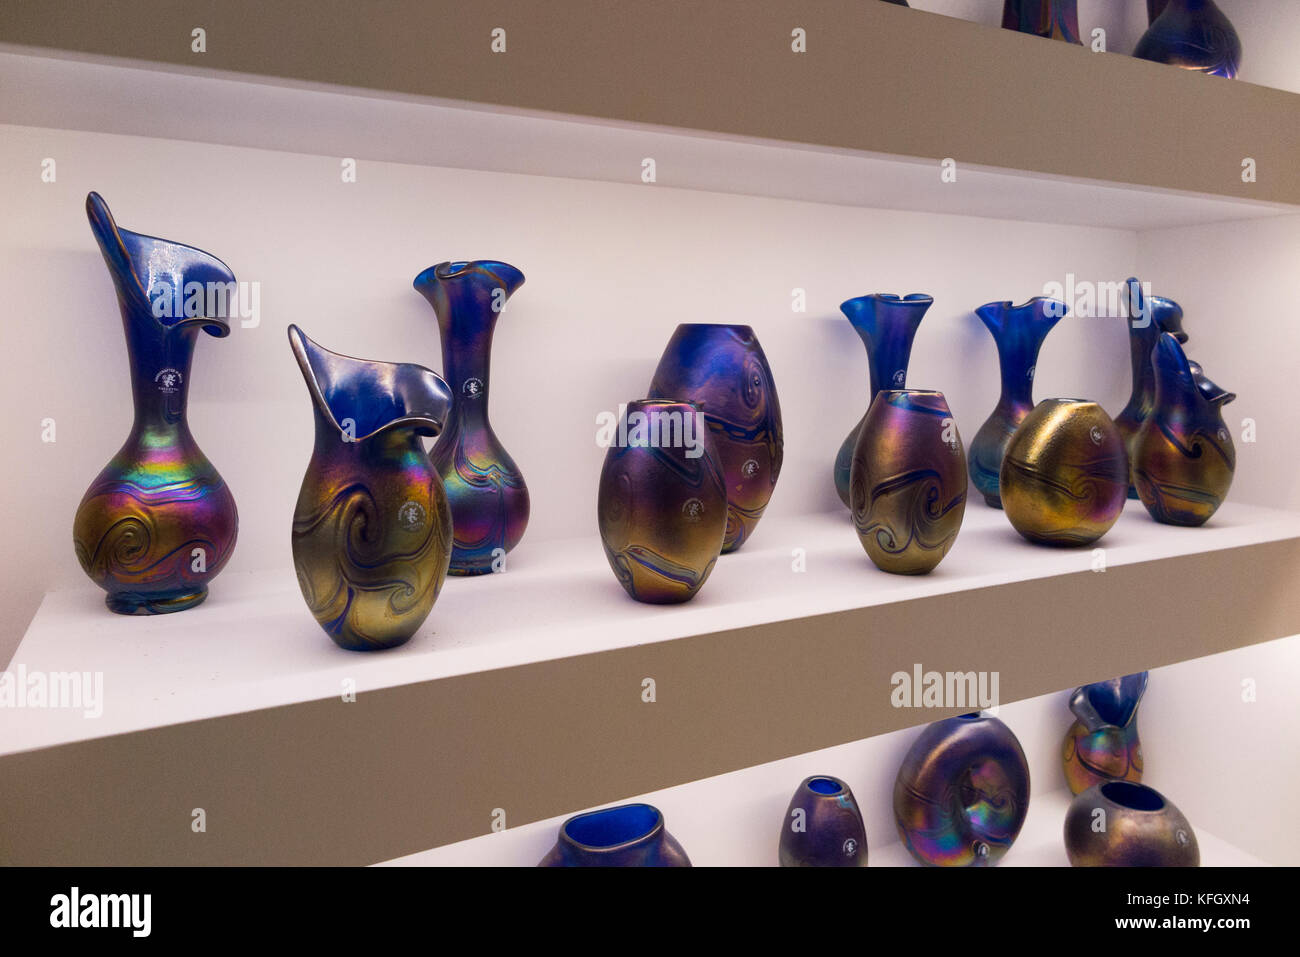 Valletta Glass products / blown glass / vase / vases on sale / for sale in the walled town of Mdina in Malta. (91) Stock Photo